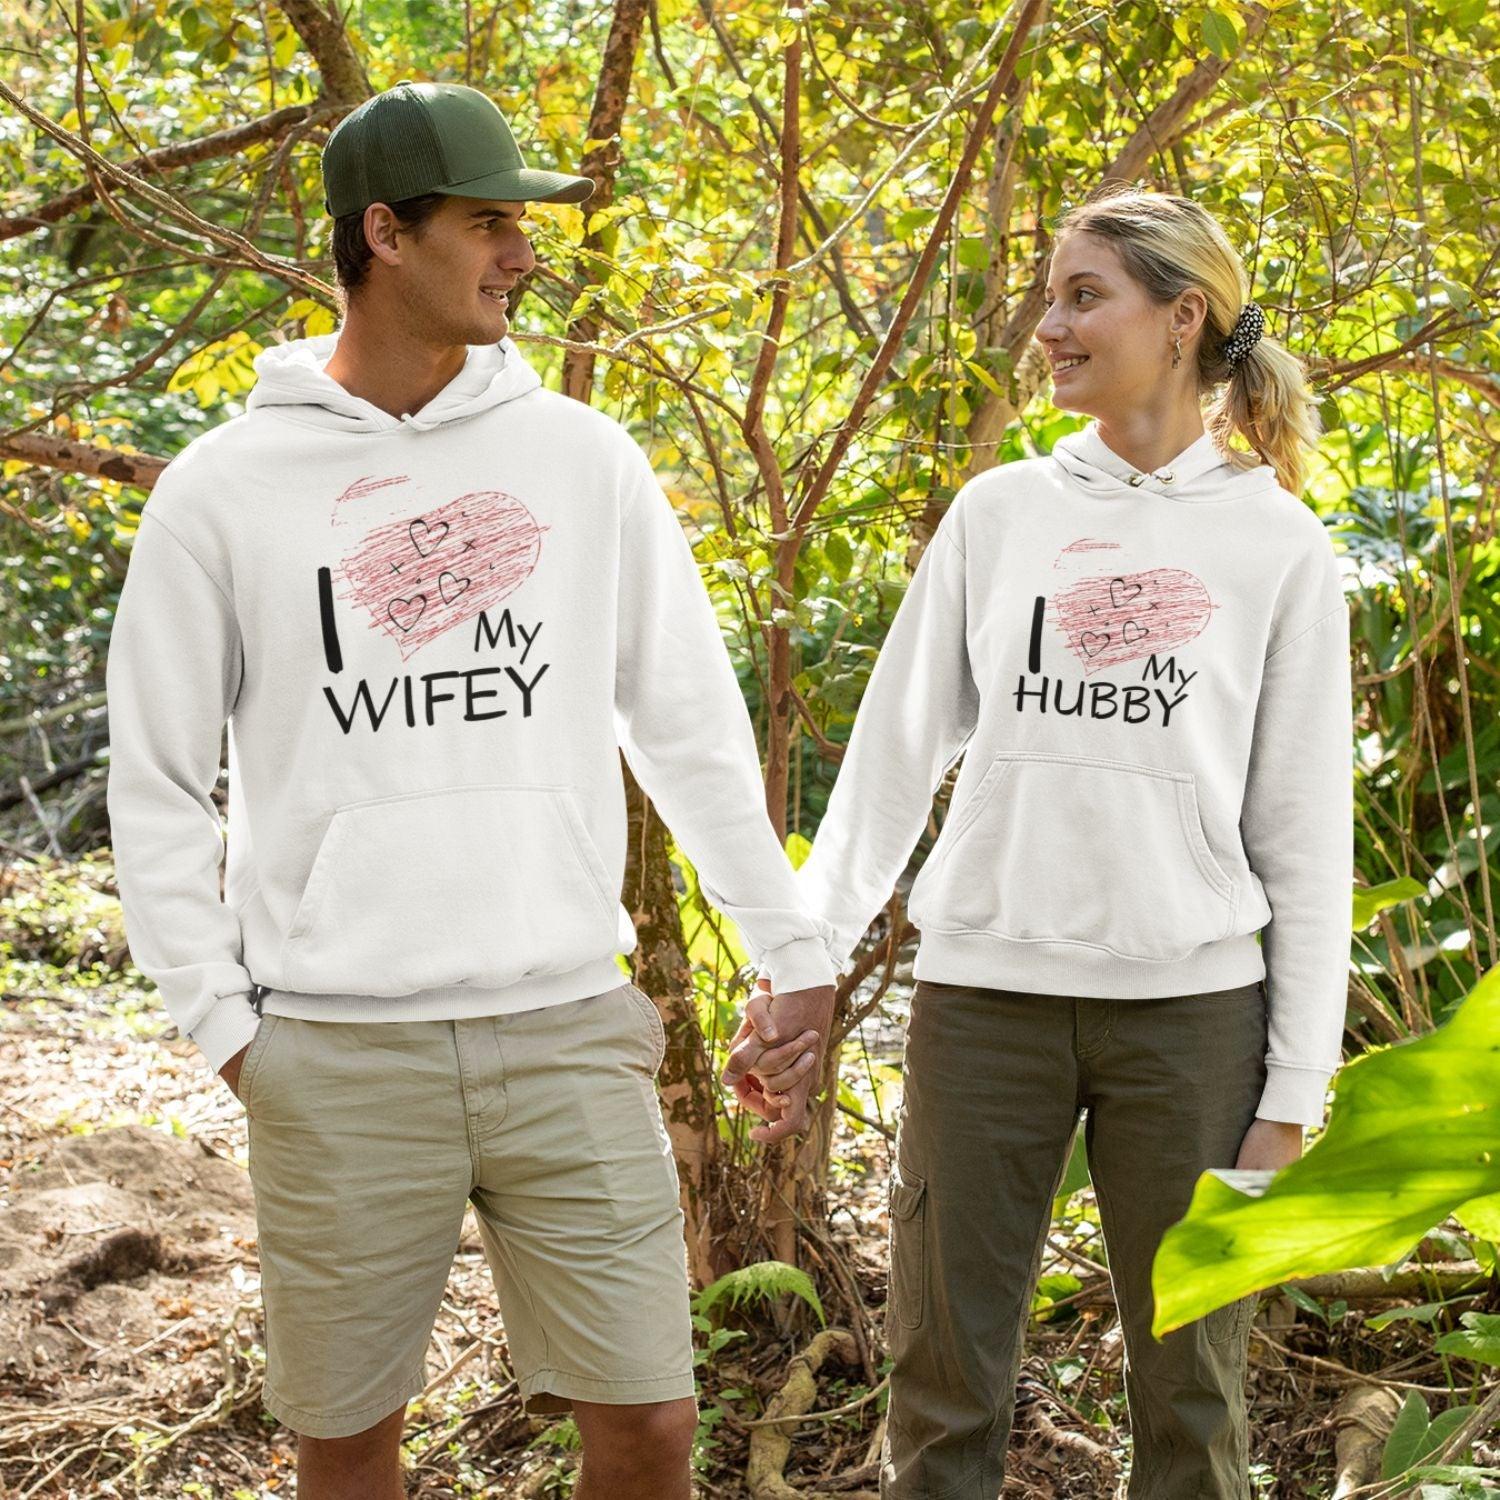 I Love My Wifey and Hubby Themed Complementary Matching Outfits Set - 4Lovebirds